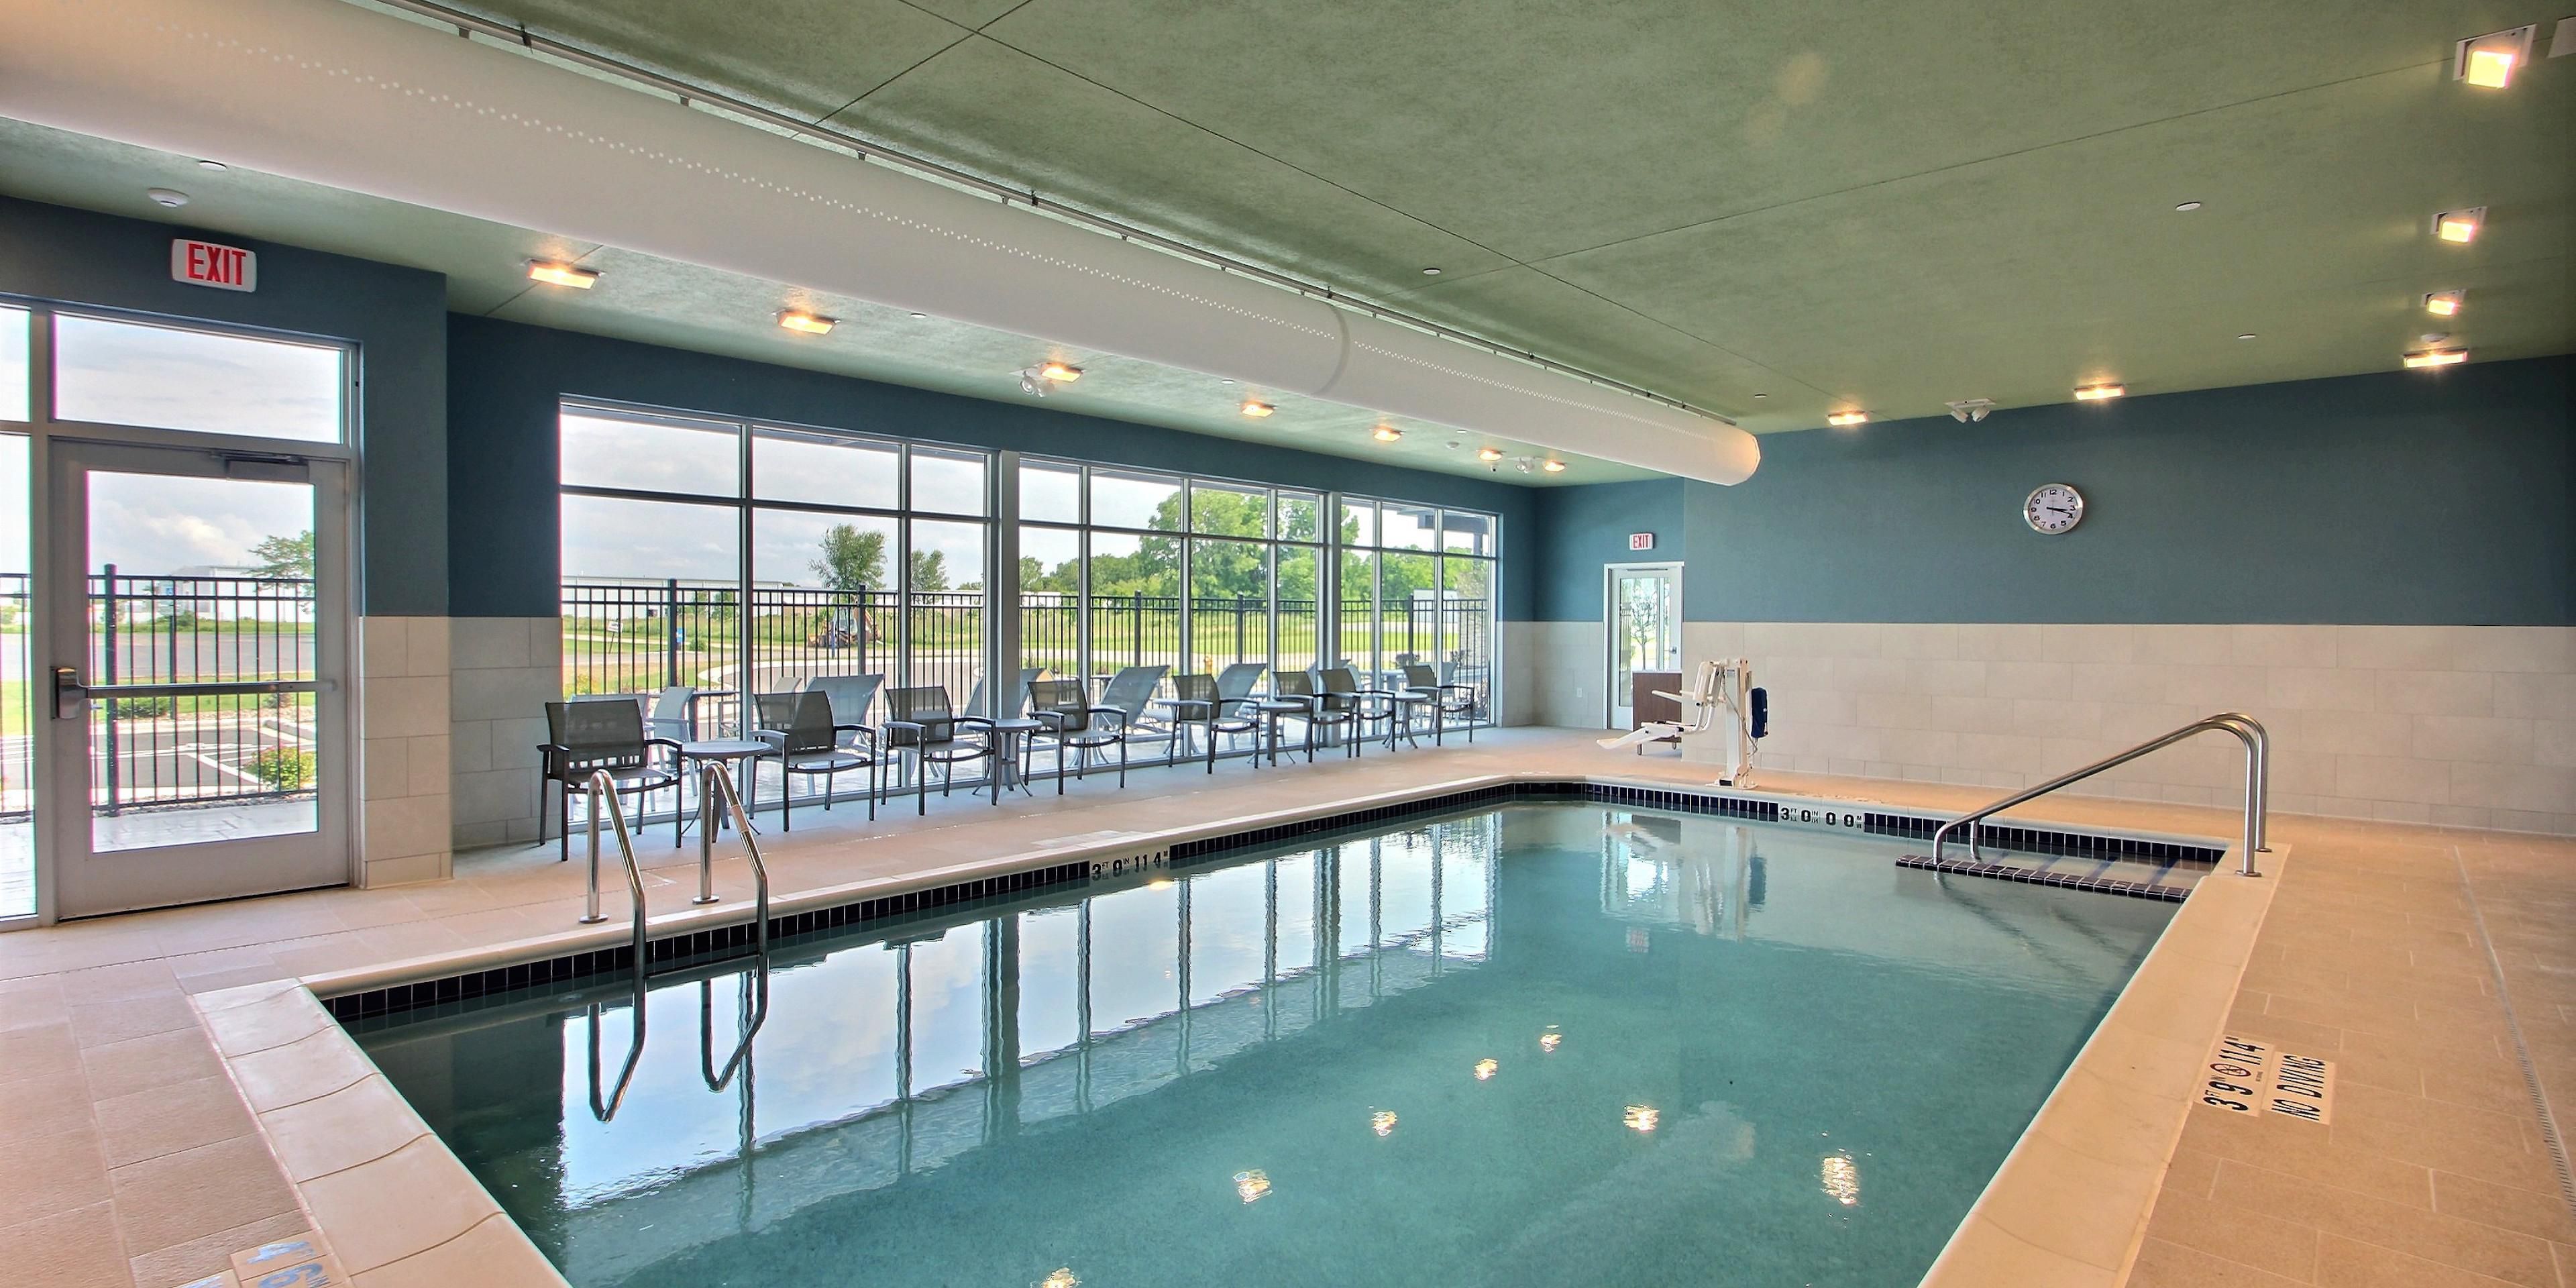 Be sure to take the time to enjoy our indoor pool during your stay. What a great way to relax, have fun, or get some exercise while traveling!